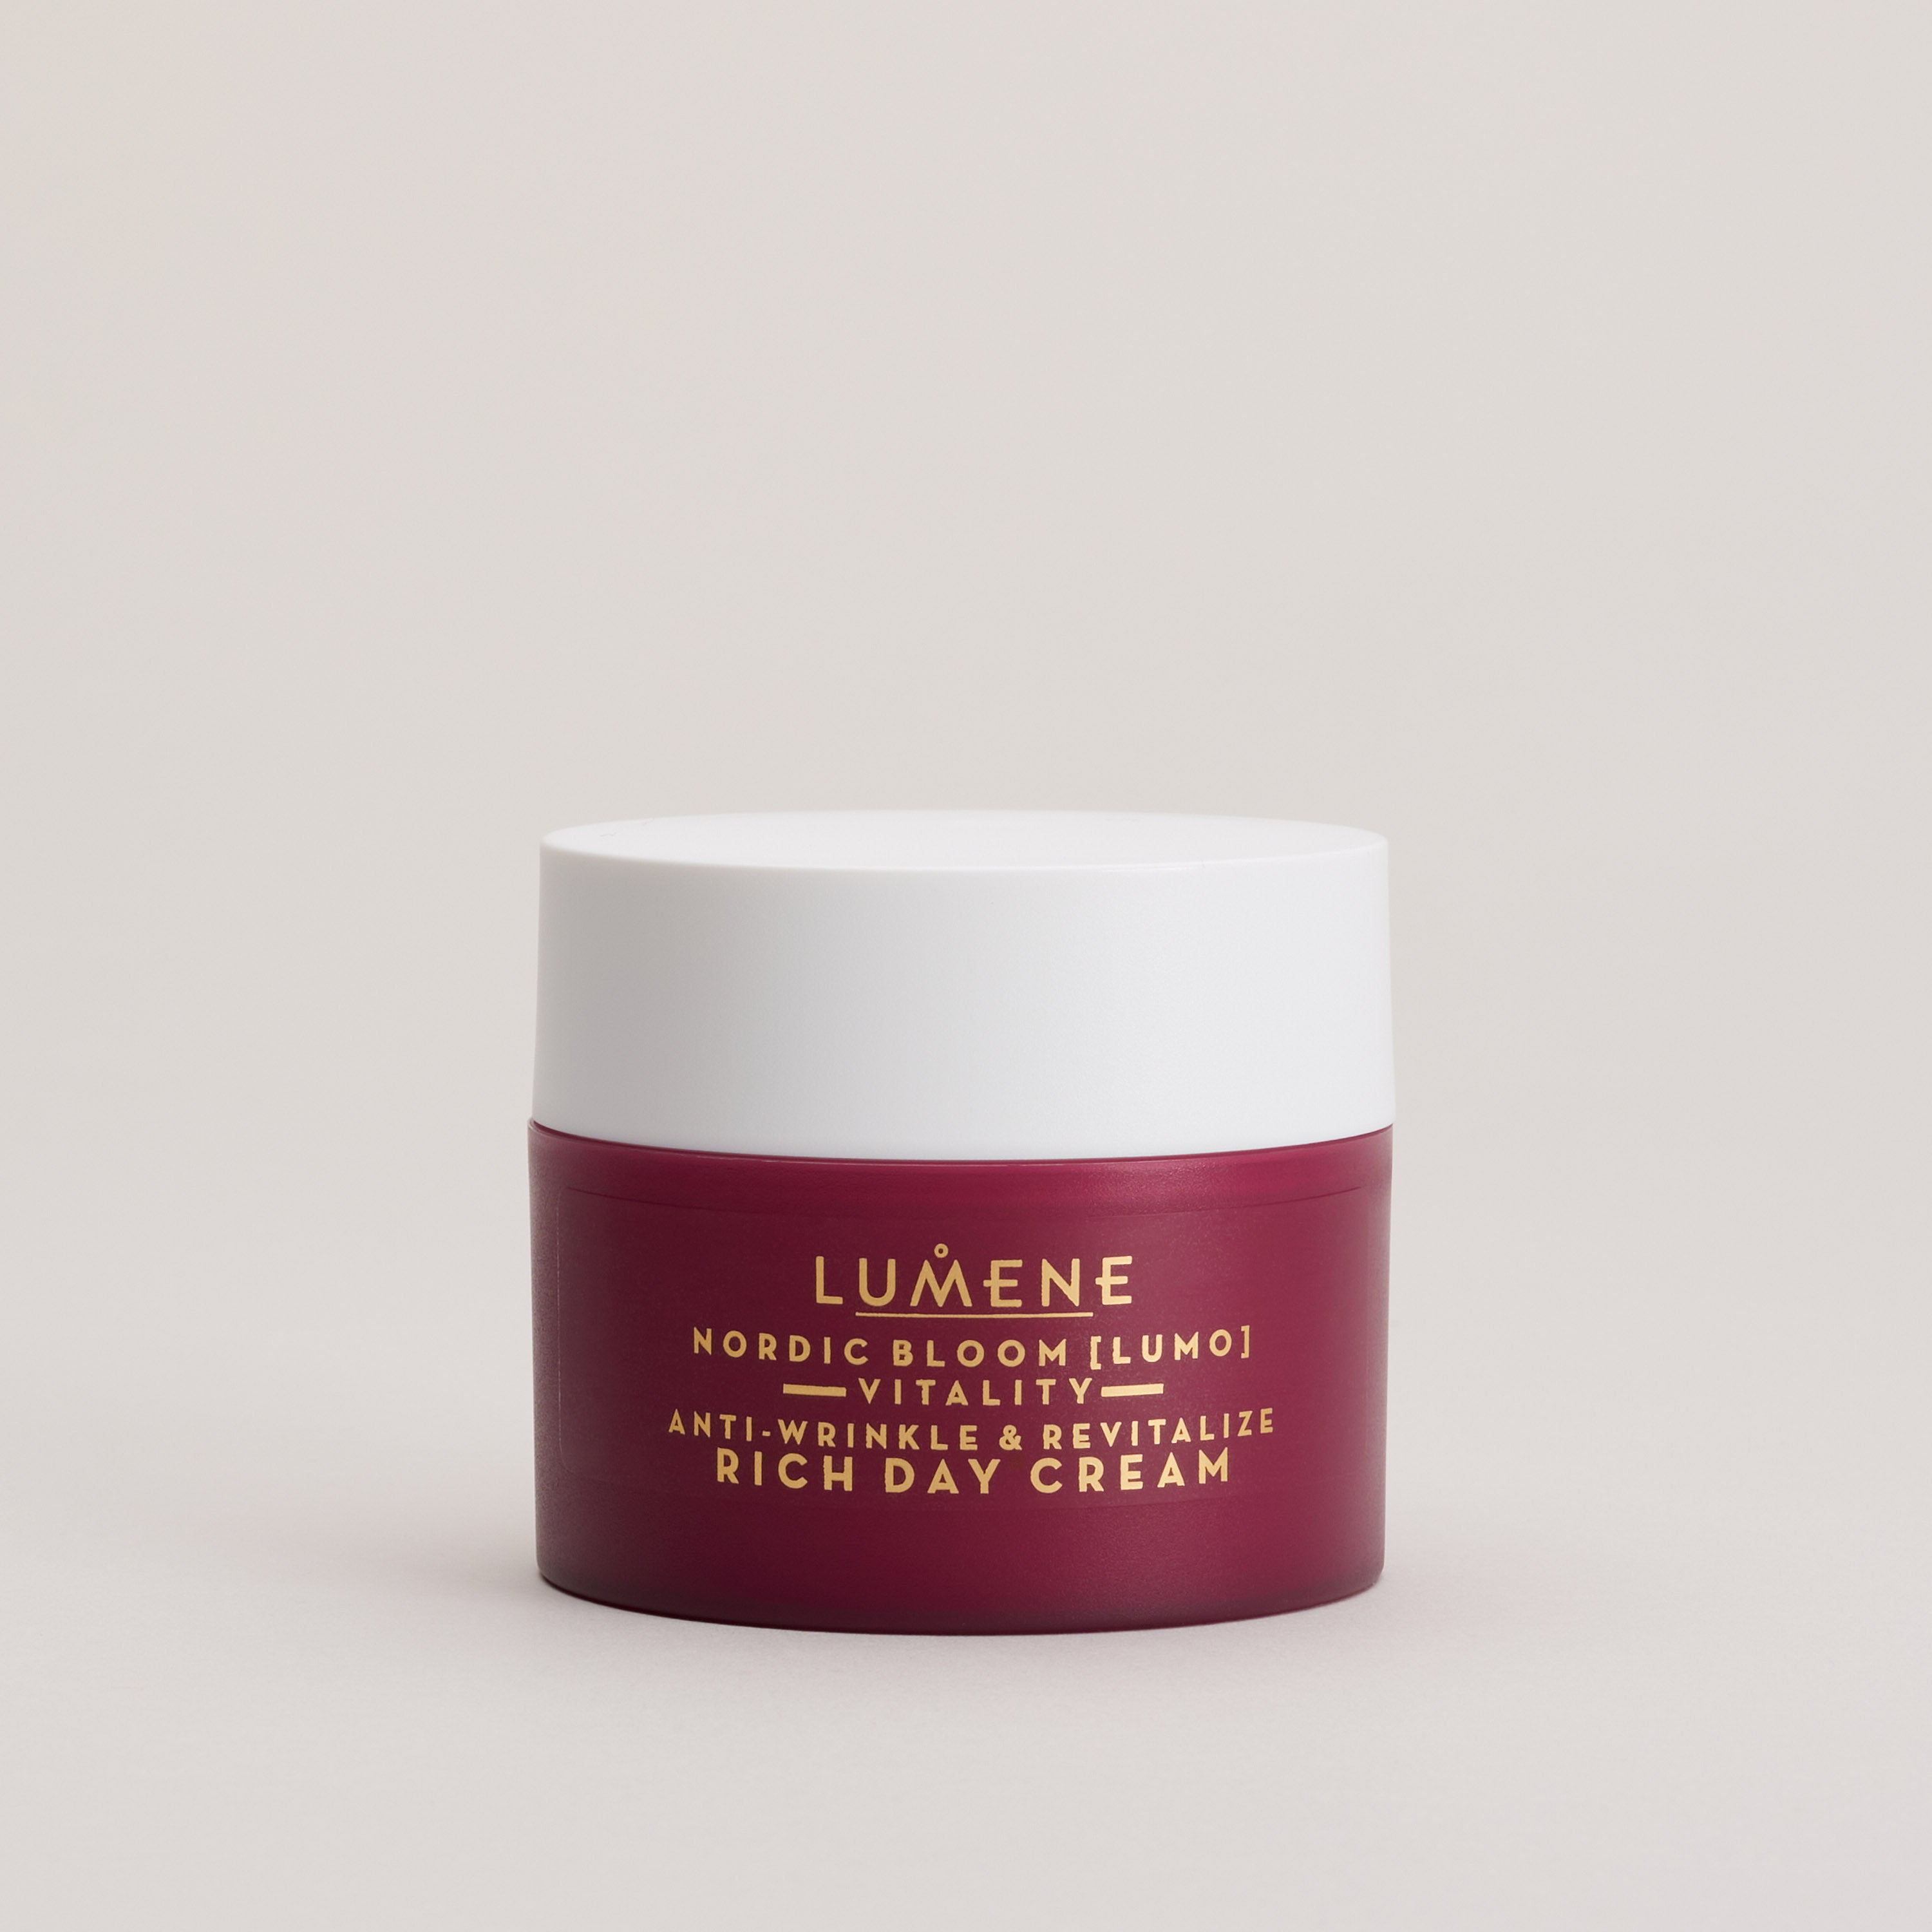 Anti-Wrinkle & Revitalize Rich Day Cream